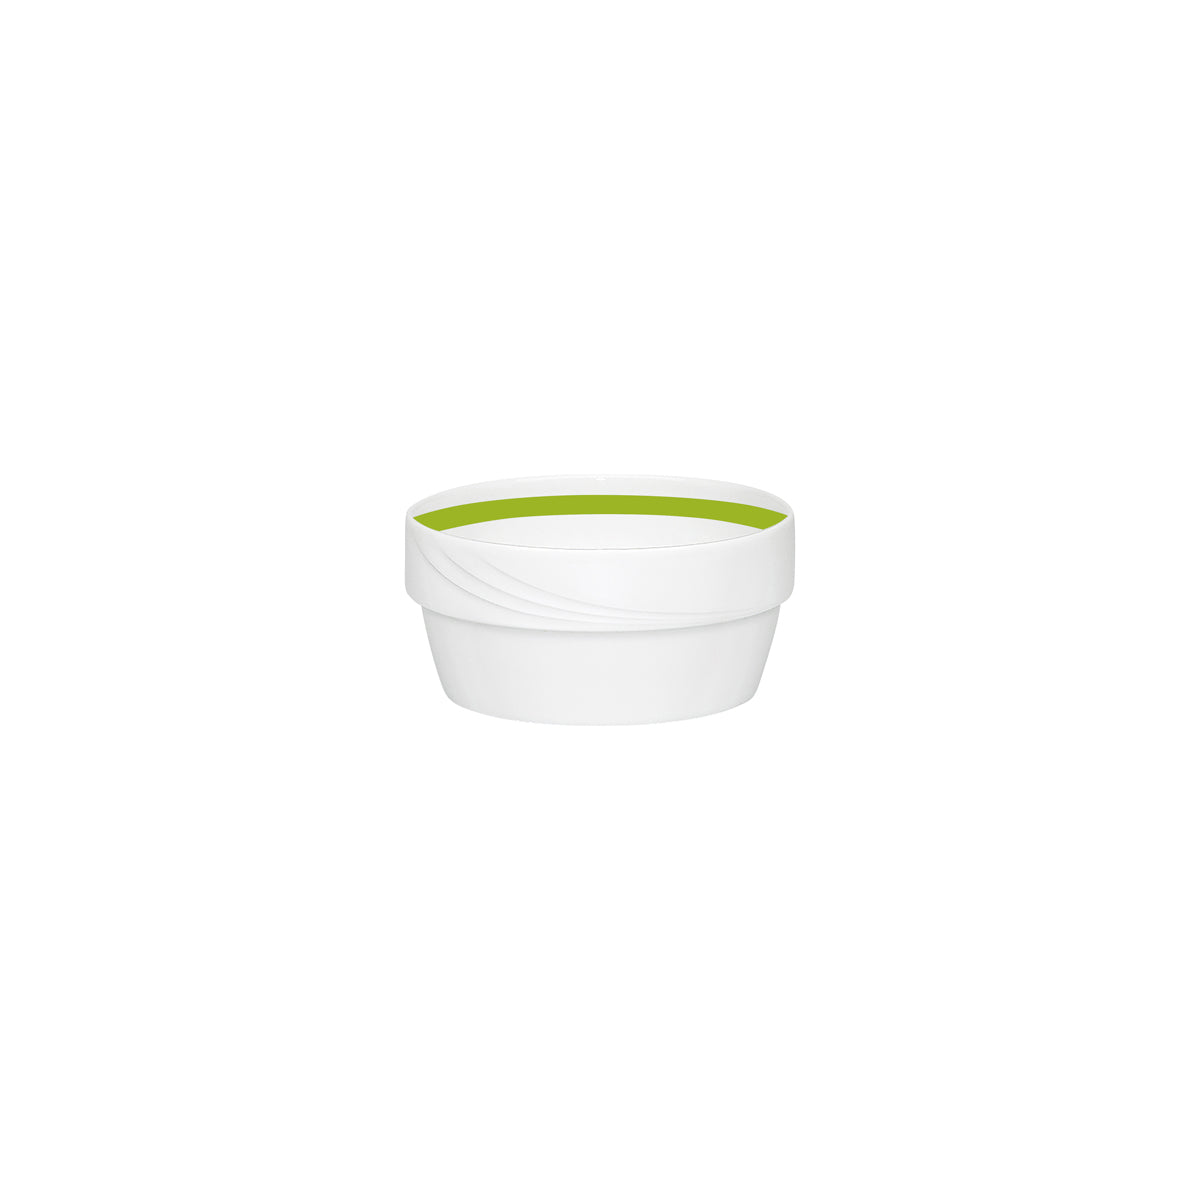 SH9185745/62941 Donna Senior Decor Stackable Round Soup Bowl with Light Green Band 125x59mm / 470ml Tomkin Australia Hospitality Supplies